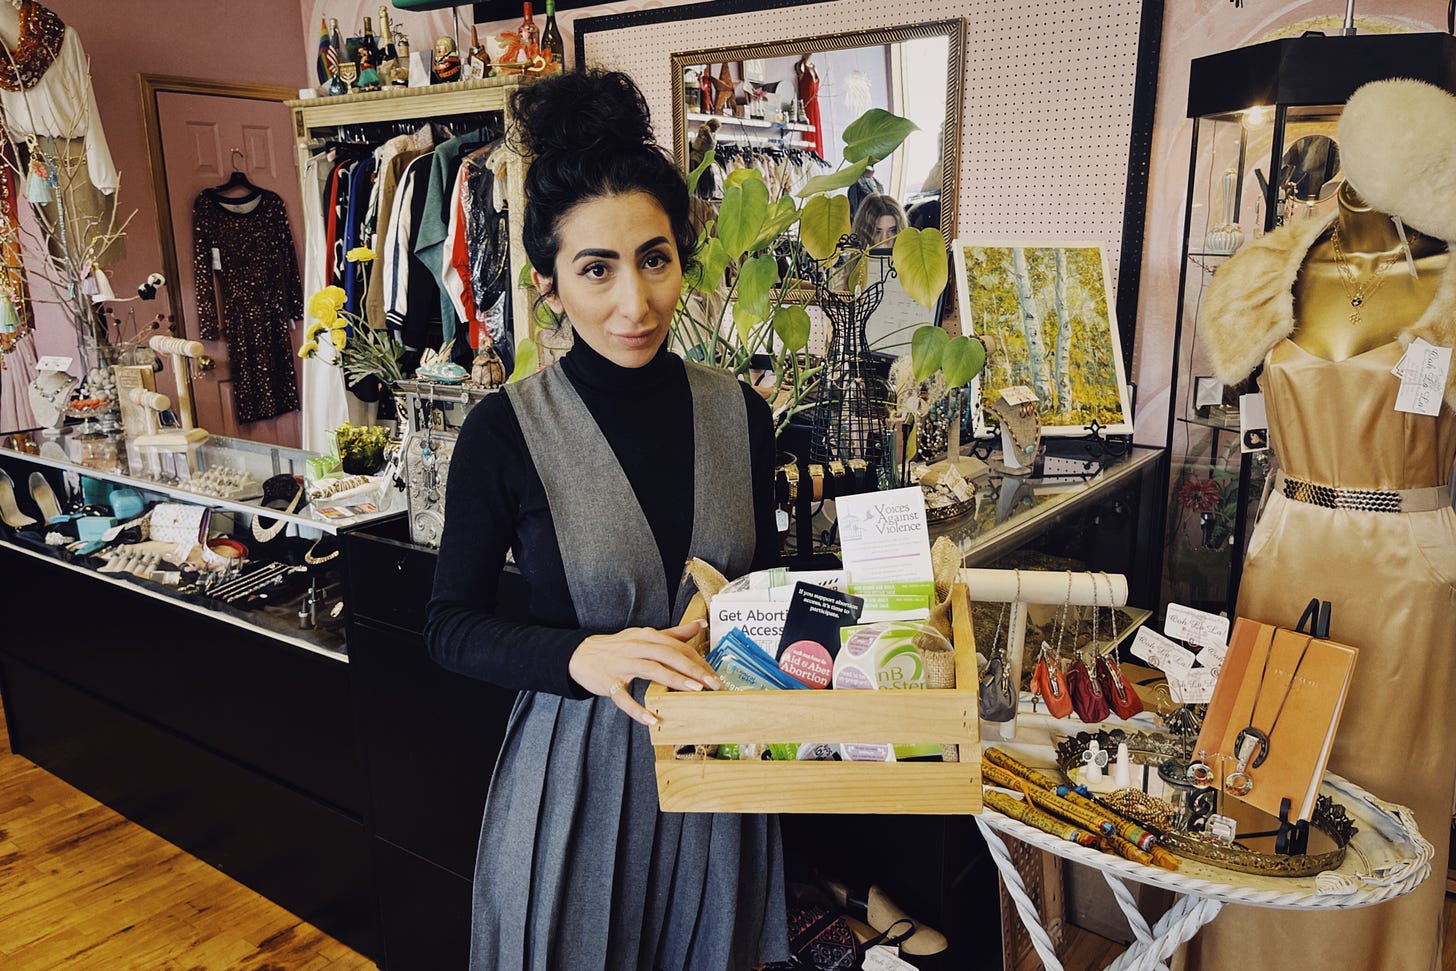 Liyah Babayan, an Armenian woman with black hair and wearing a black turtleneck with a gray dress over top, holds a reproductive health box containing emergency contraception, information about abortion, and more. Behind her is the checkout area of her boutique. It is a colorful space, with jewelry, clothing, and dress forms visible in the background.